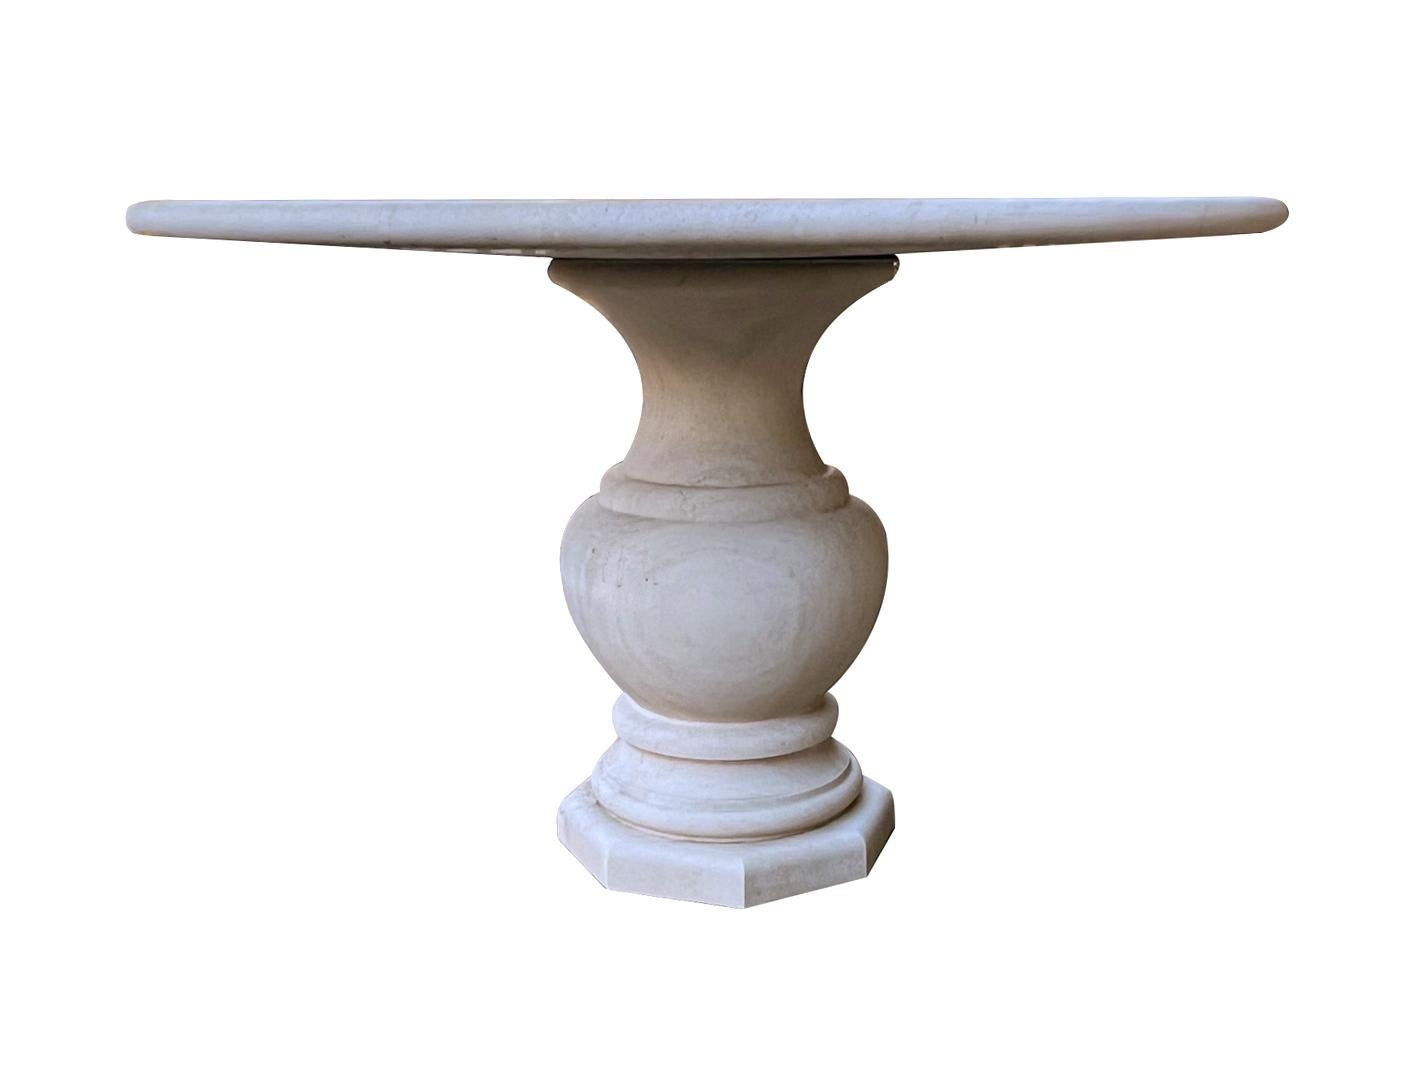 this classically styled table hand-crafted in France with thick circular top with bullnose edge; raised on a robust and shapely baluster-form base; overall even wear and patina to surface